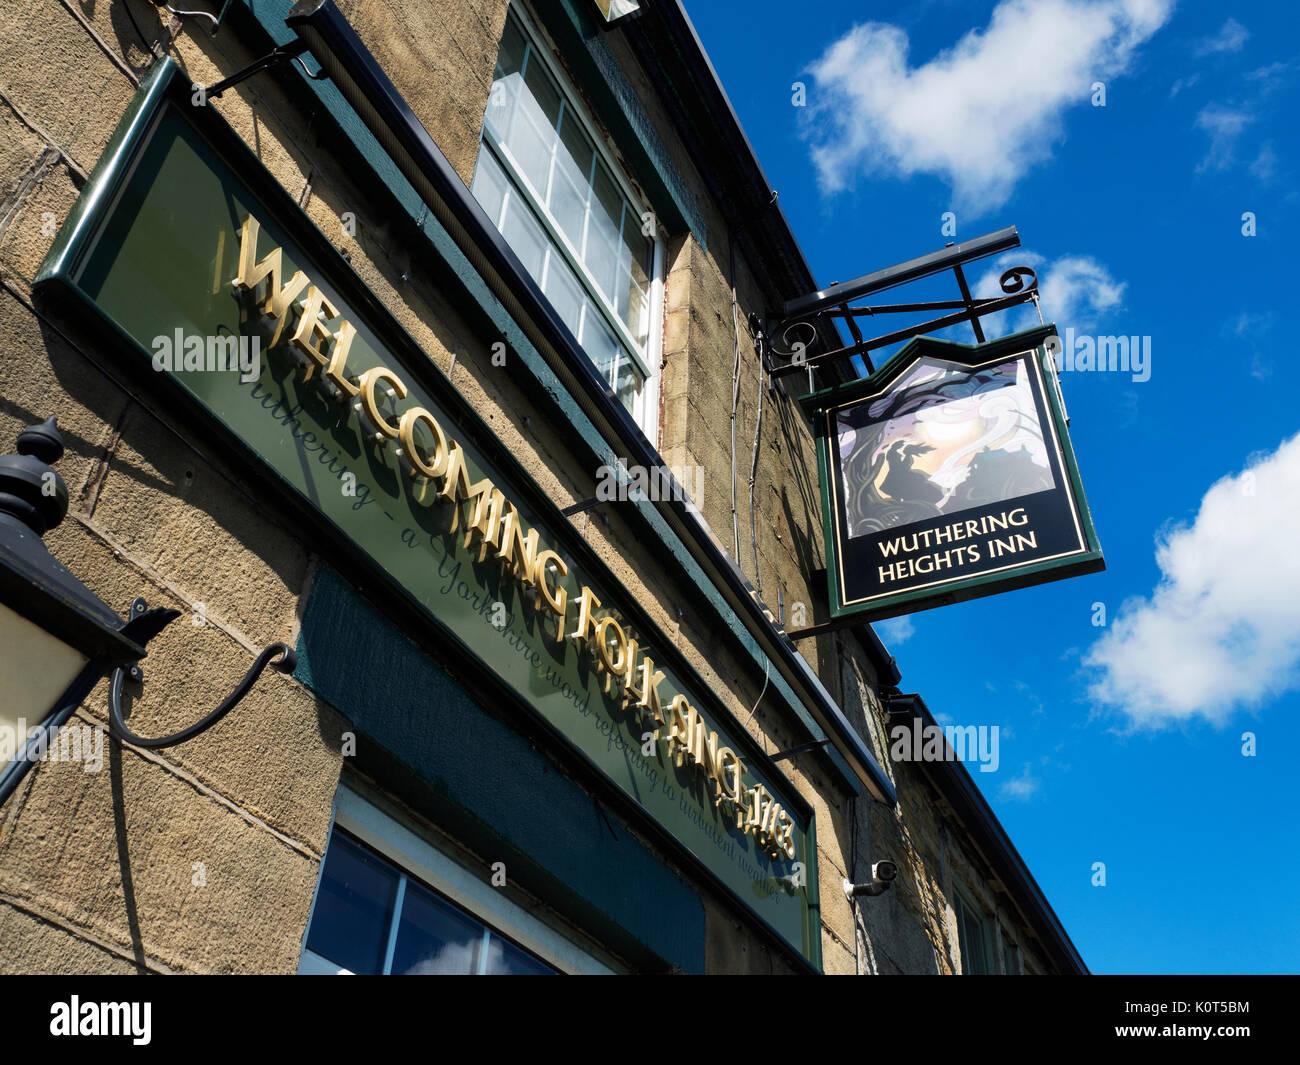 Il Wuthering Heights Inn a Stanbury vicino a Haworth West Yorkshire Inghilterra Foto Stock